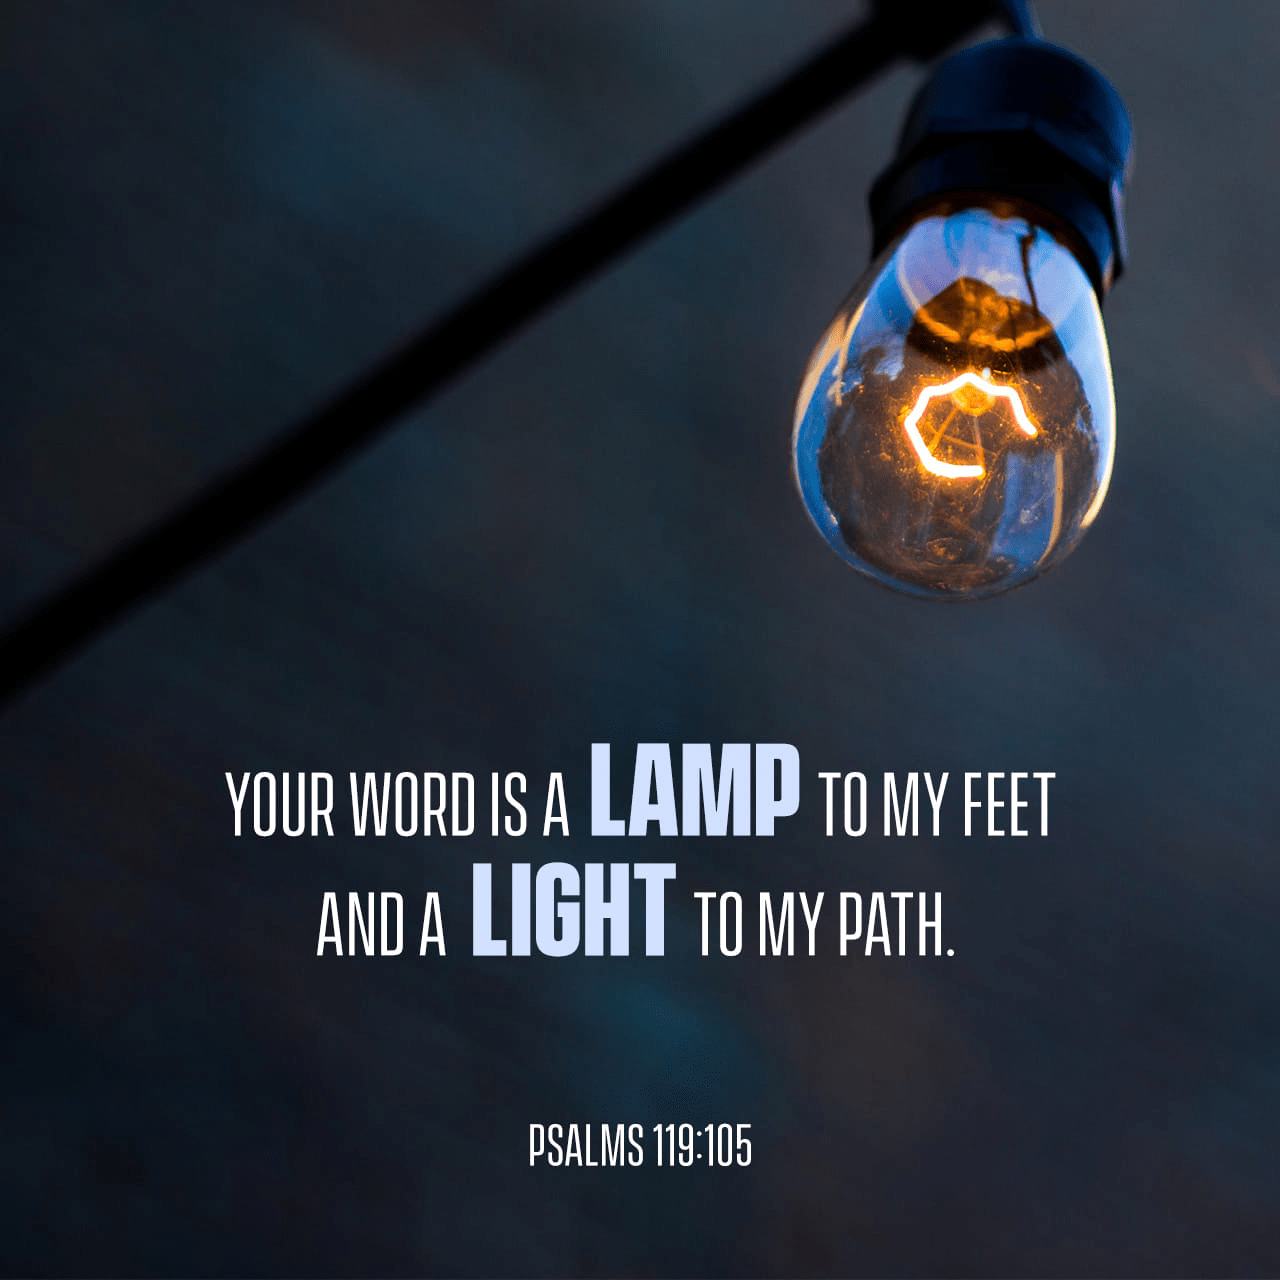 VOTD February 16 - “Your word is a lamp to my feet And a light to my path.” ‭‭Psalms‬ ‭119:105‬ ‭NASB‬‬